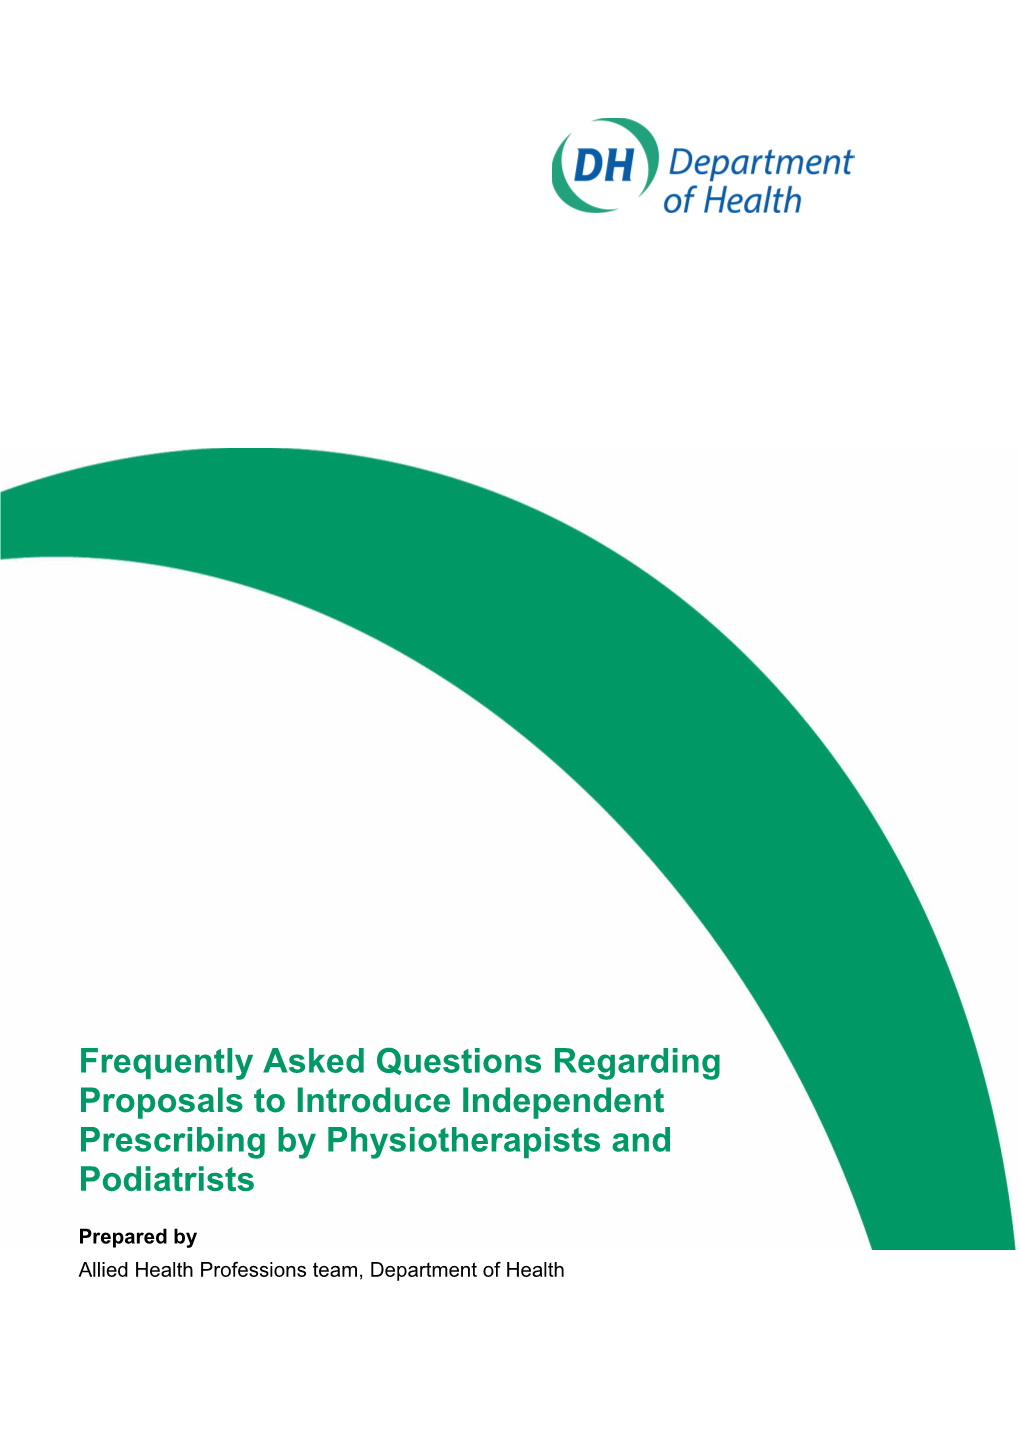 Consultation on Proposals to Introduce Independent Prescribing by Physiotherapists